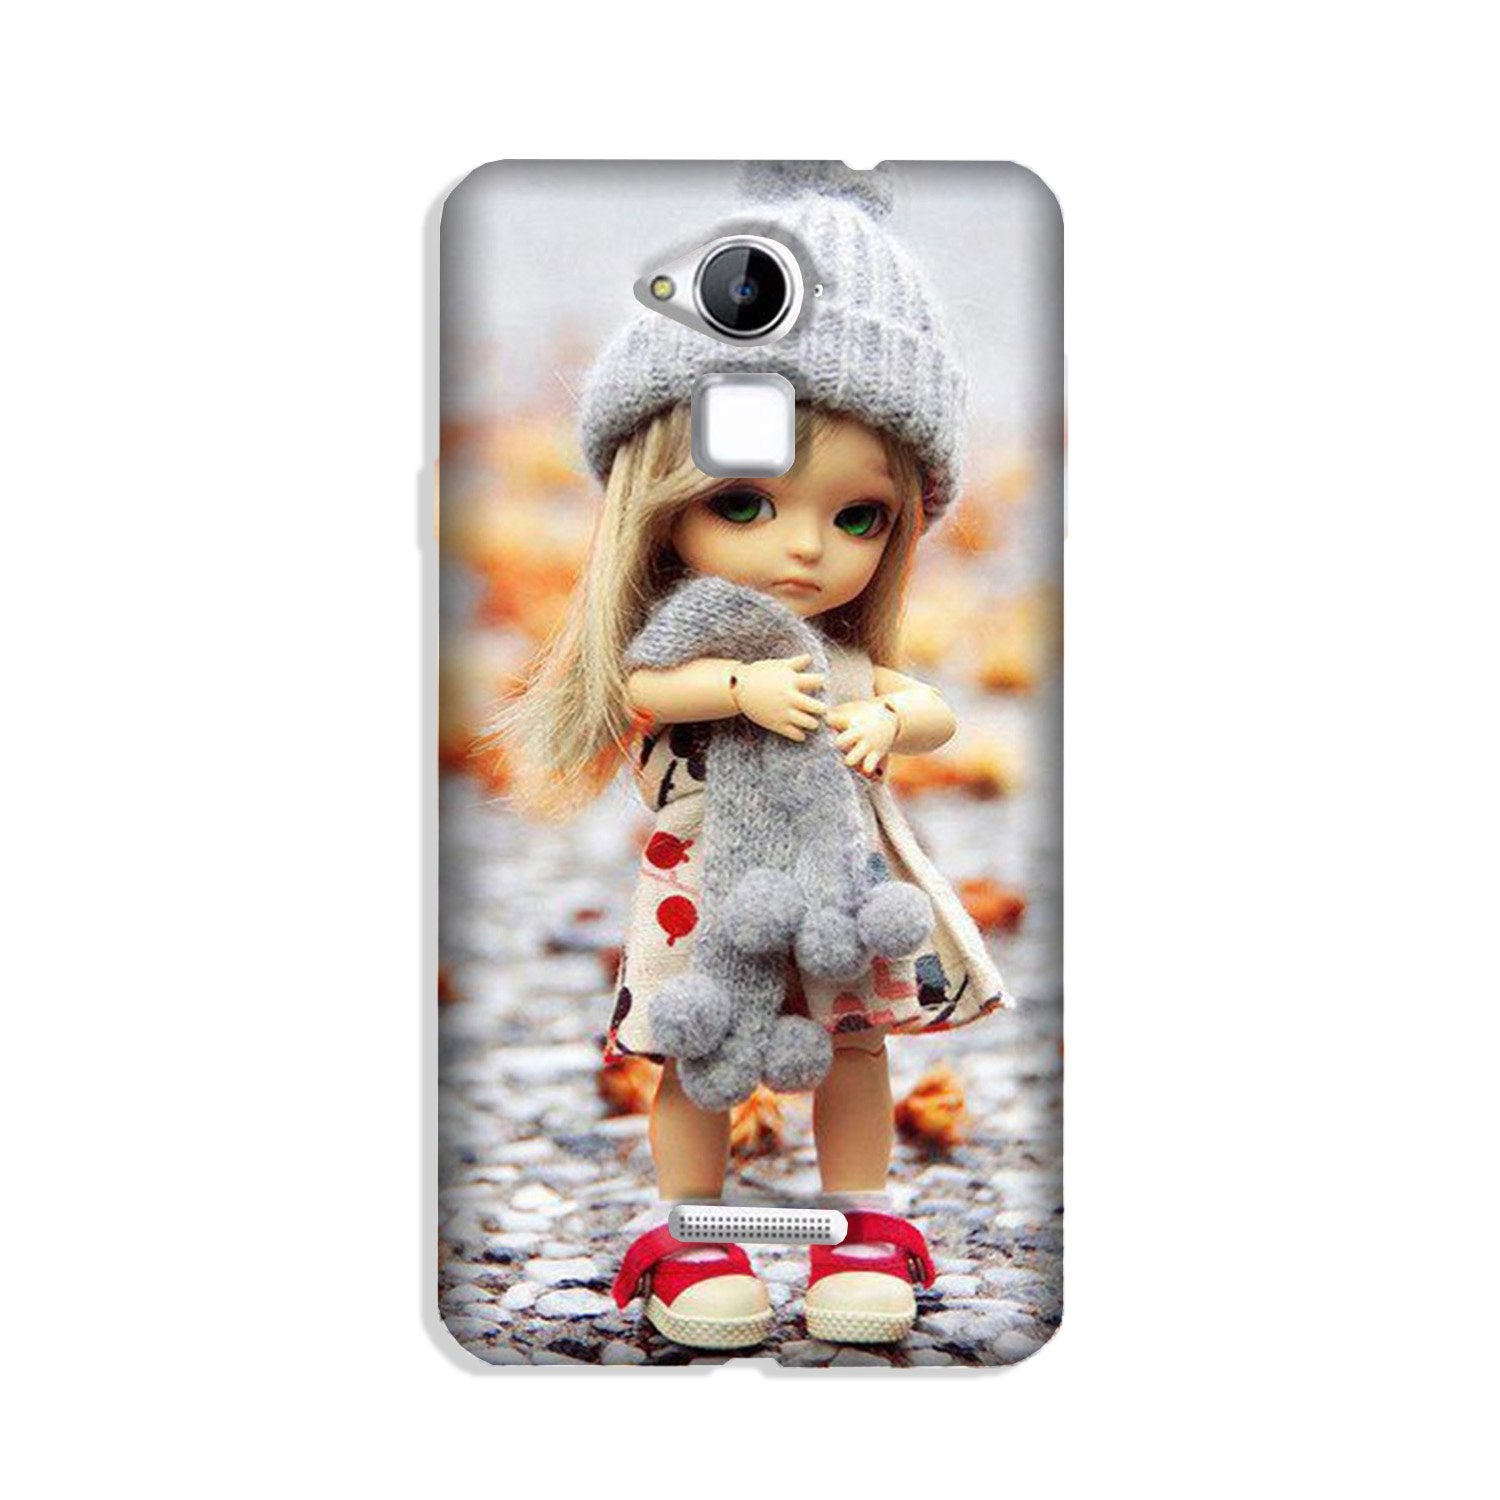 Cute Doll Case for Coolpad Note 3